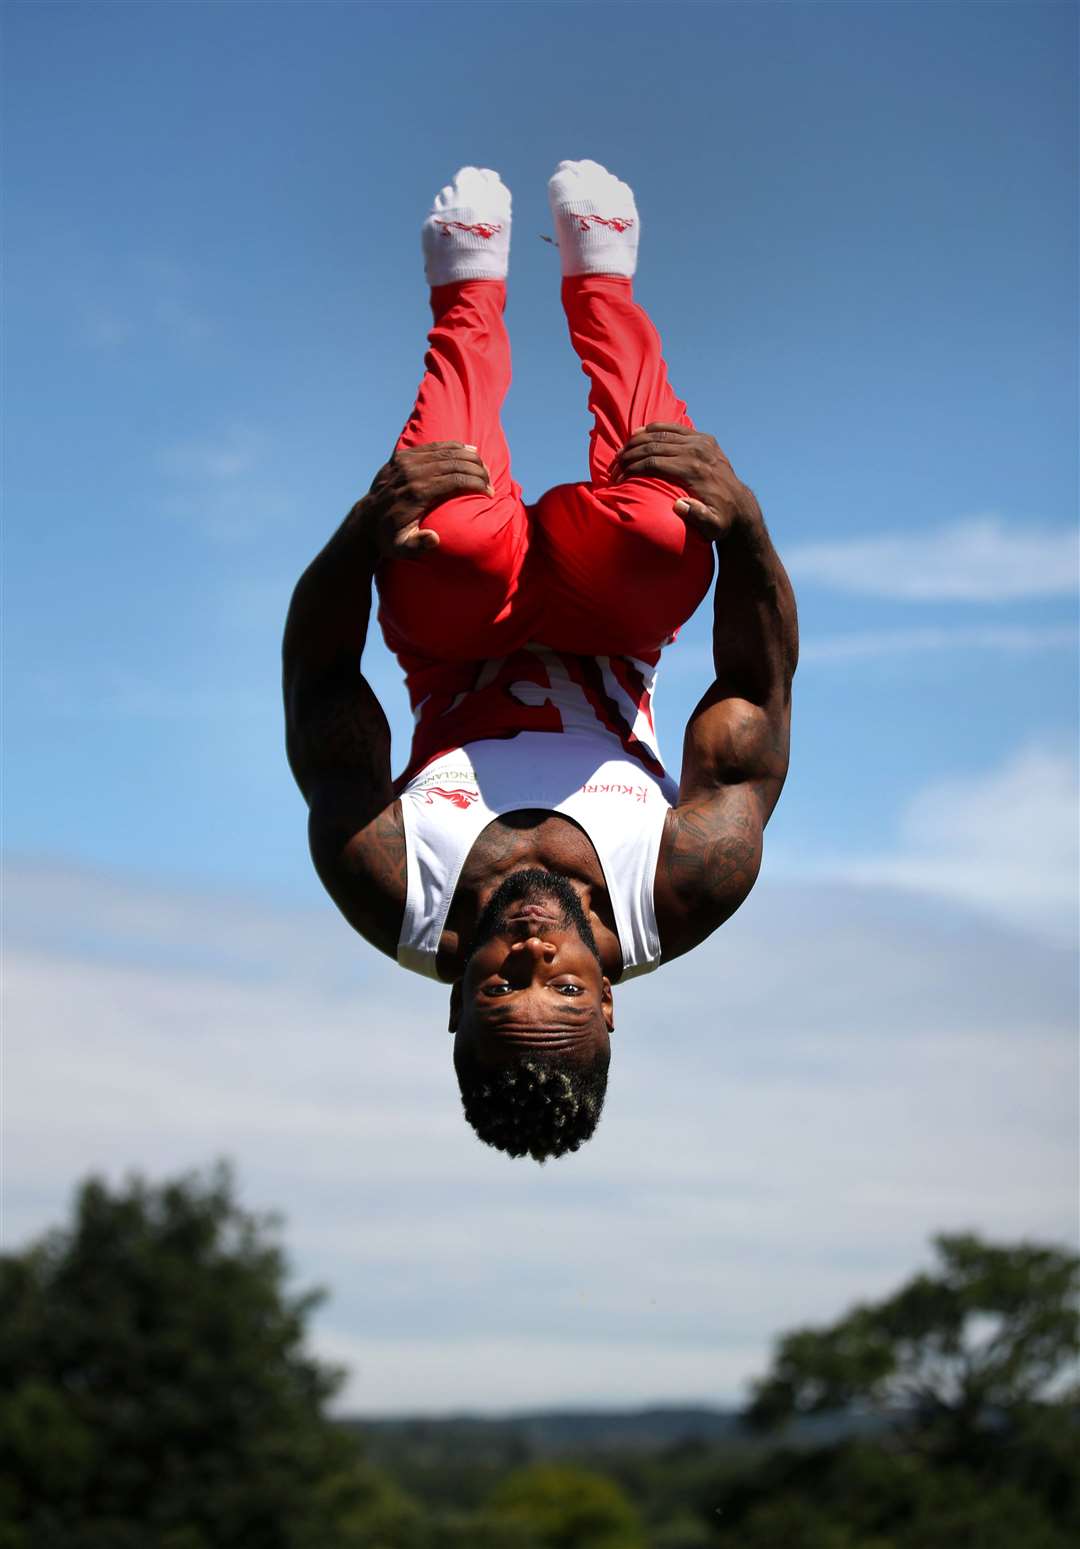 Maidstone gymnast Courtney Tulloch Picture: Getty Images (40668257)